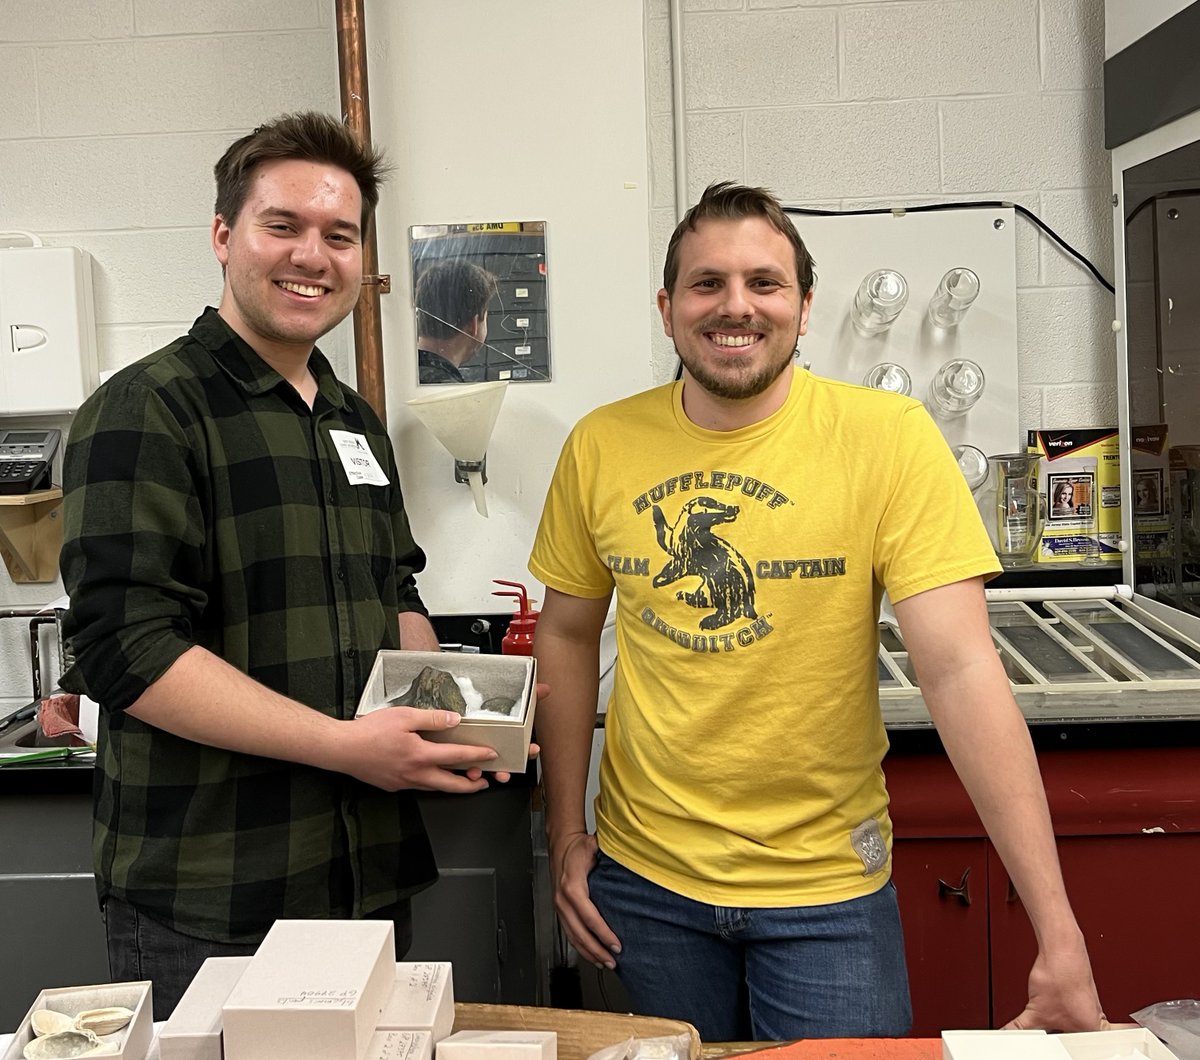 Last week we recognized our Education Bureau volunteers; this week we're thanking our Natural History volunteers Mike and CJ for their work identifying and cataloging specimens and interacting with visitors to the Paleo lab! #NationalVoluteerWeek